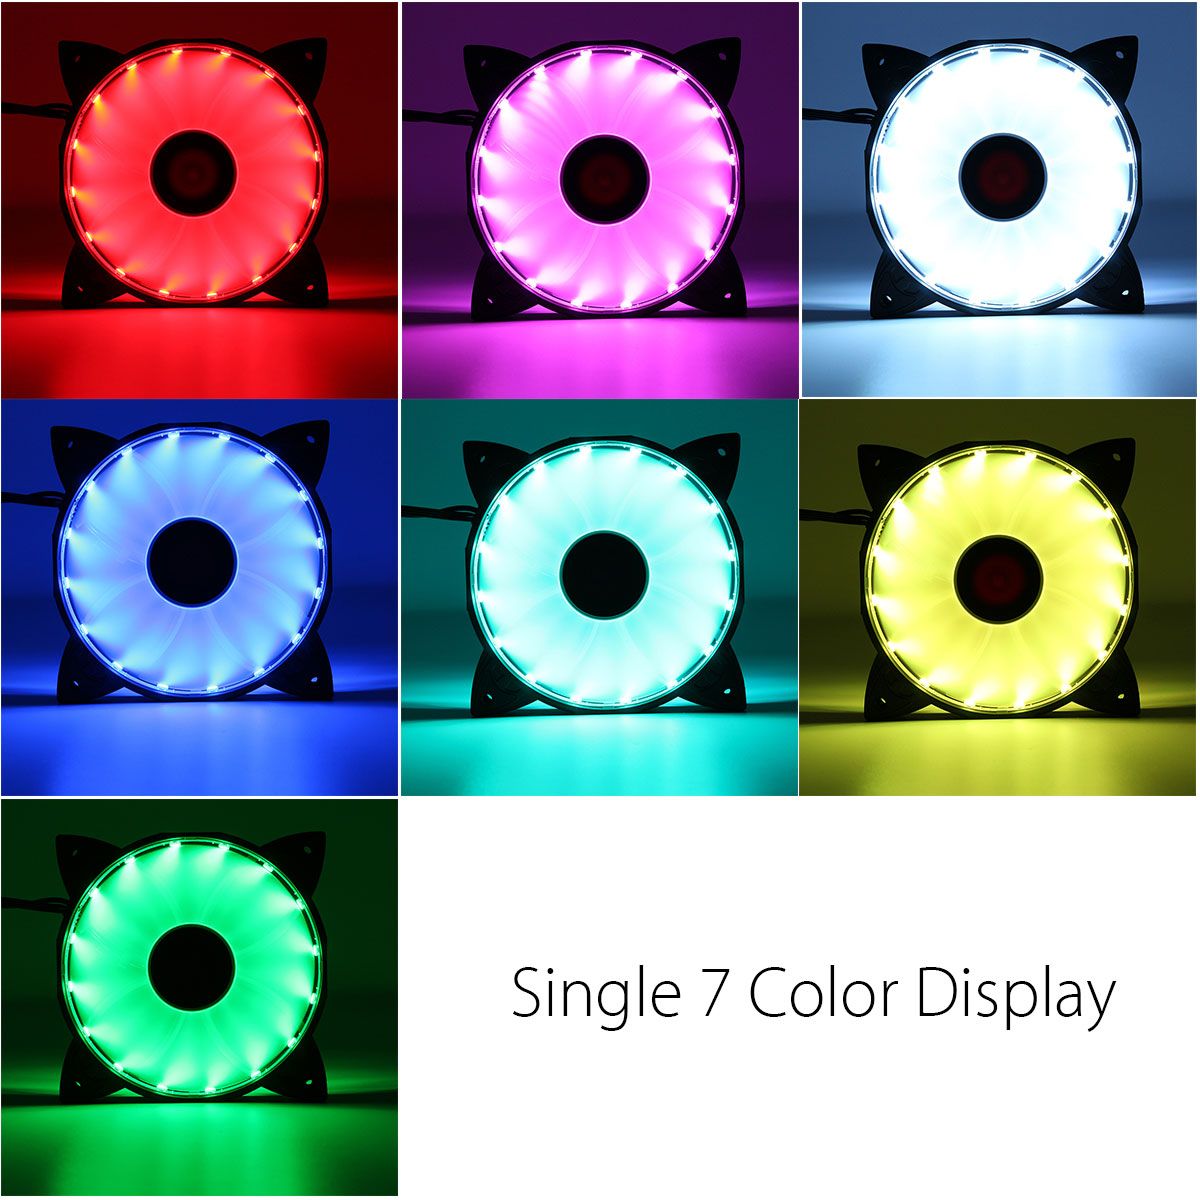 Coolmoon-30000Hrs-3PCS-120mm-RGB-Adjustable-LED-Cooling-Fan-with-Controller-Remote-For-PC-Cooling-1198616